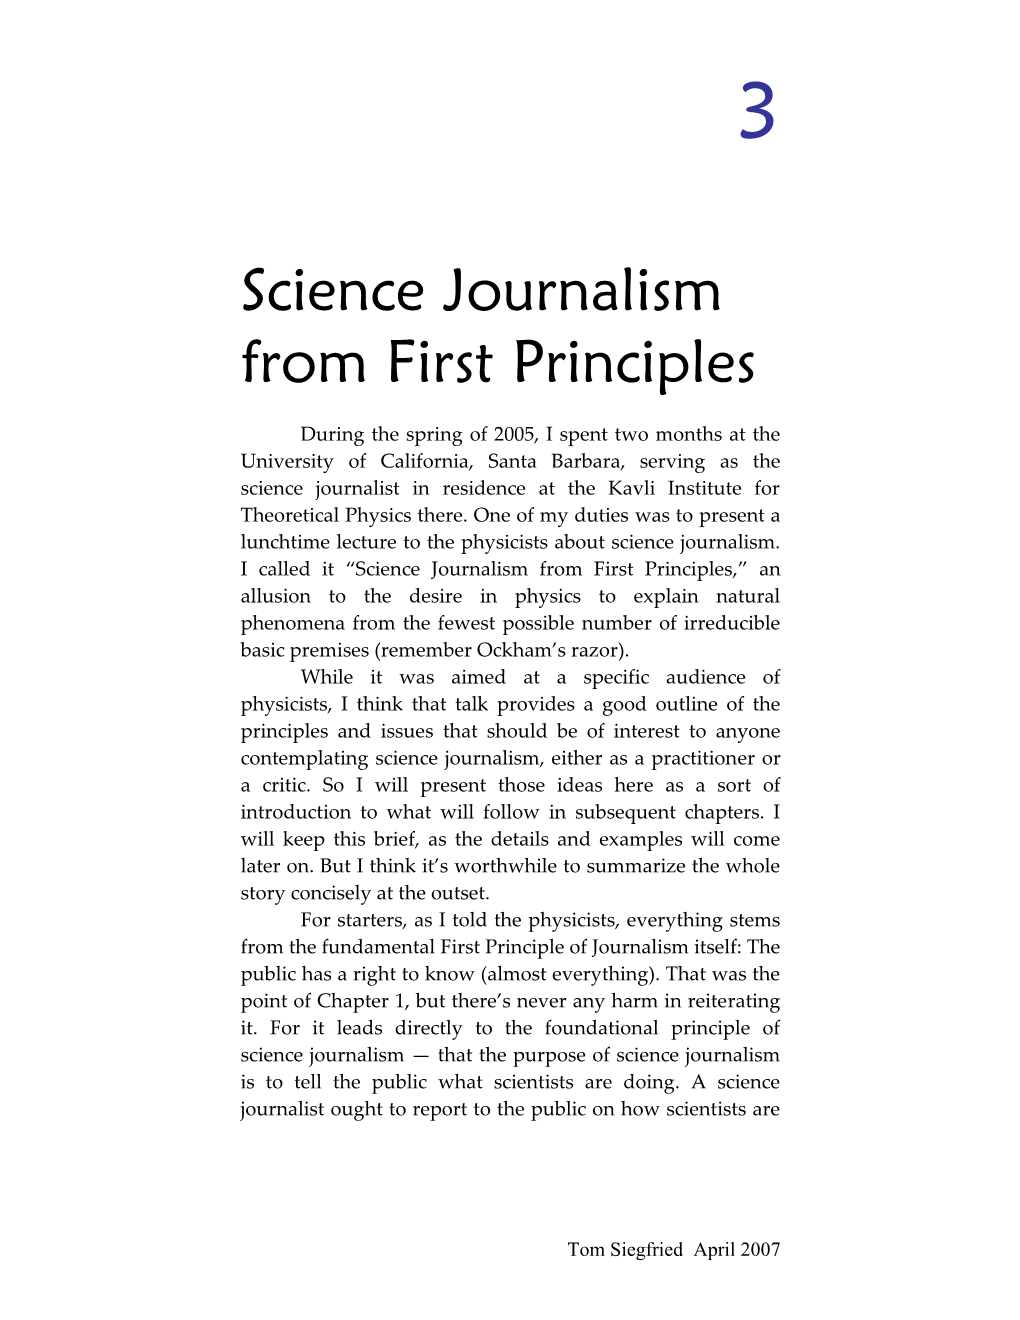 Science Journalism from First Principles